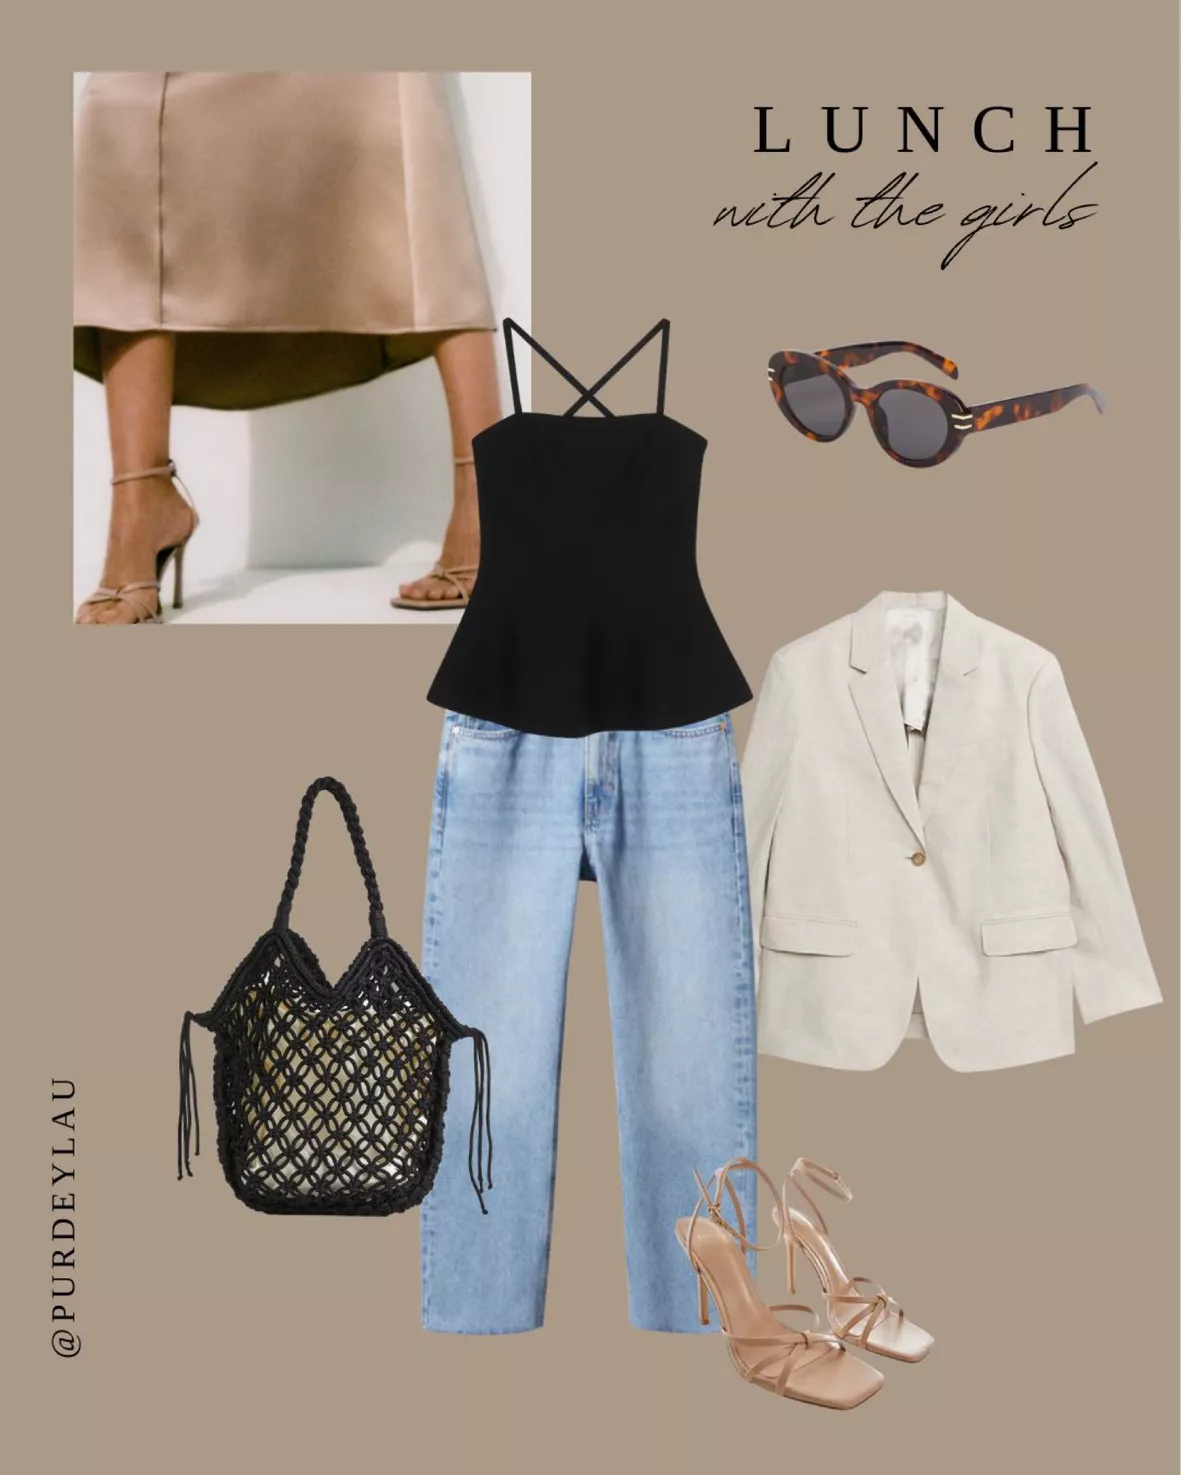 ladies who lunch  Peplum top outfits, Fashion, Top outfits